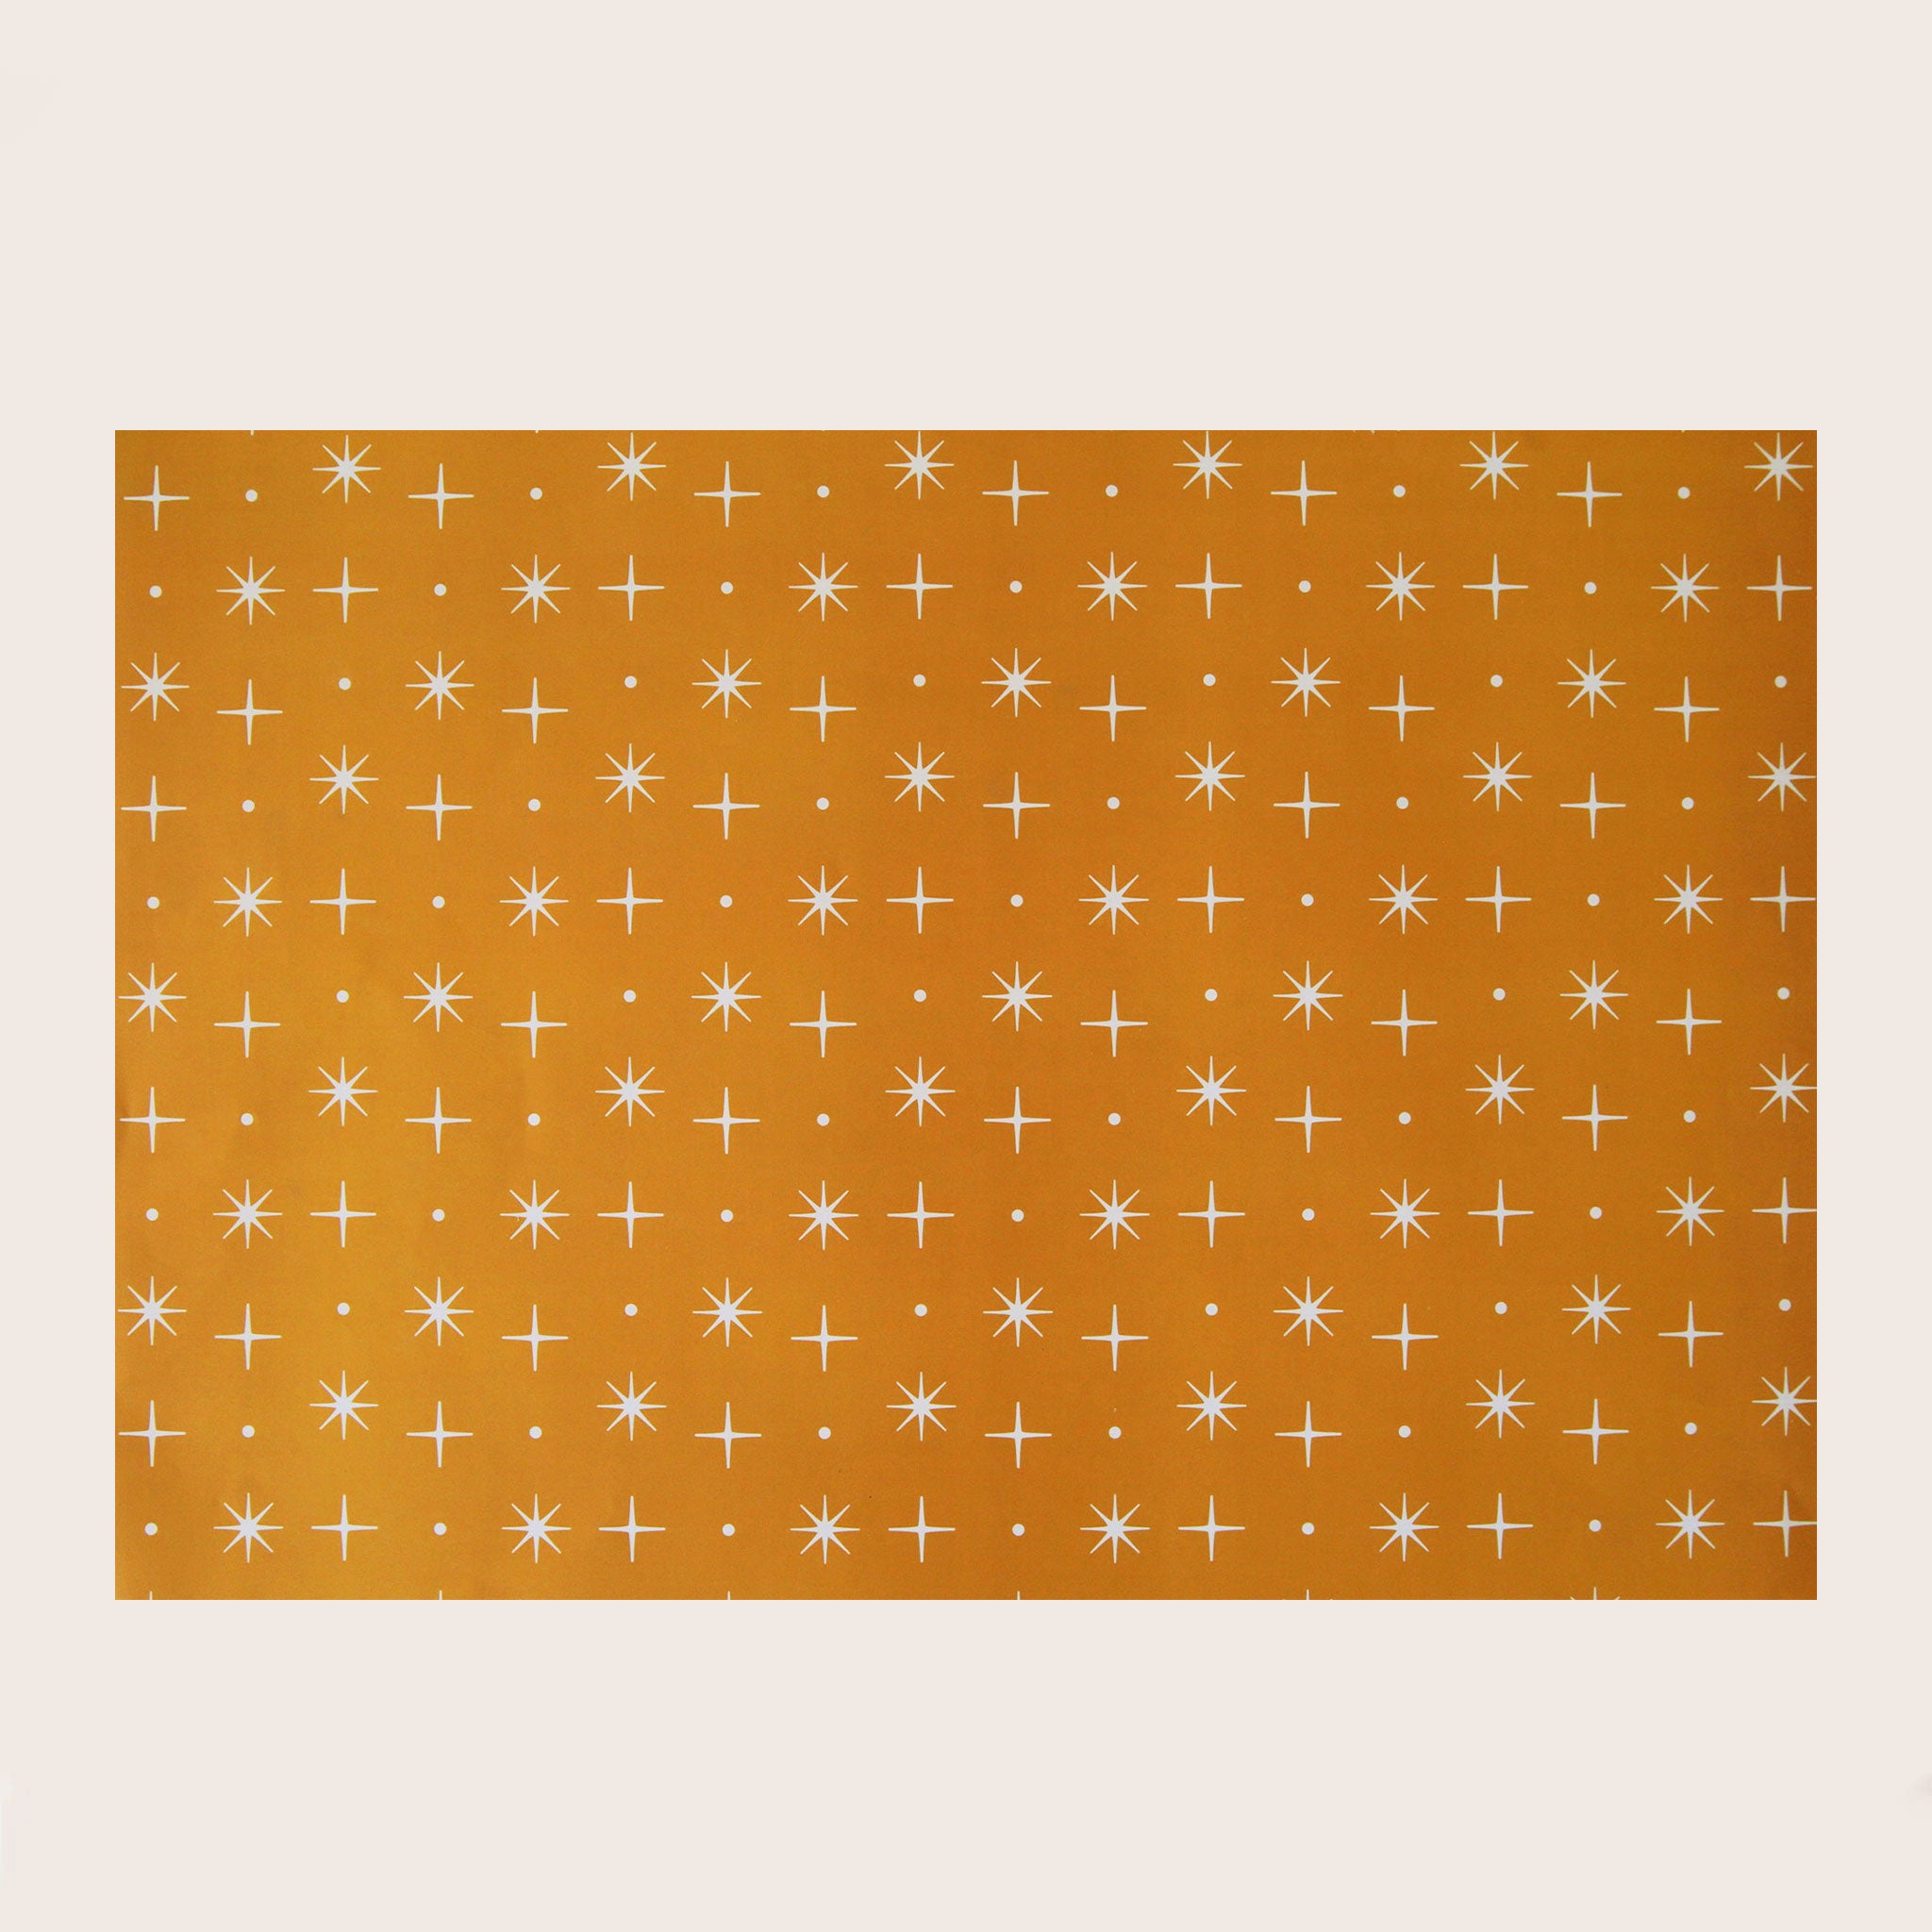 A single sheet of gift wrap featuring a mustard yellow background with a repeating white star design. On the flip side, you have the option of a cream background with groovy vehicles including vintage inspired RV's, and VW bugs and buses.